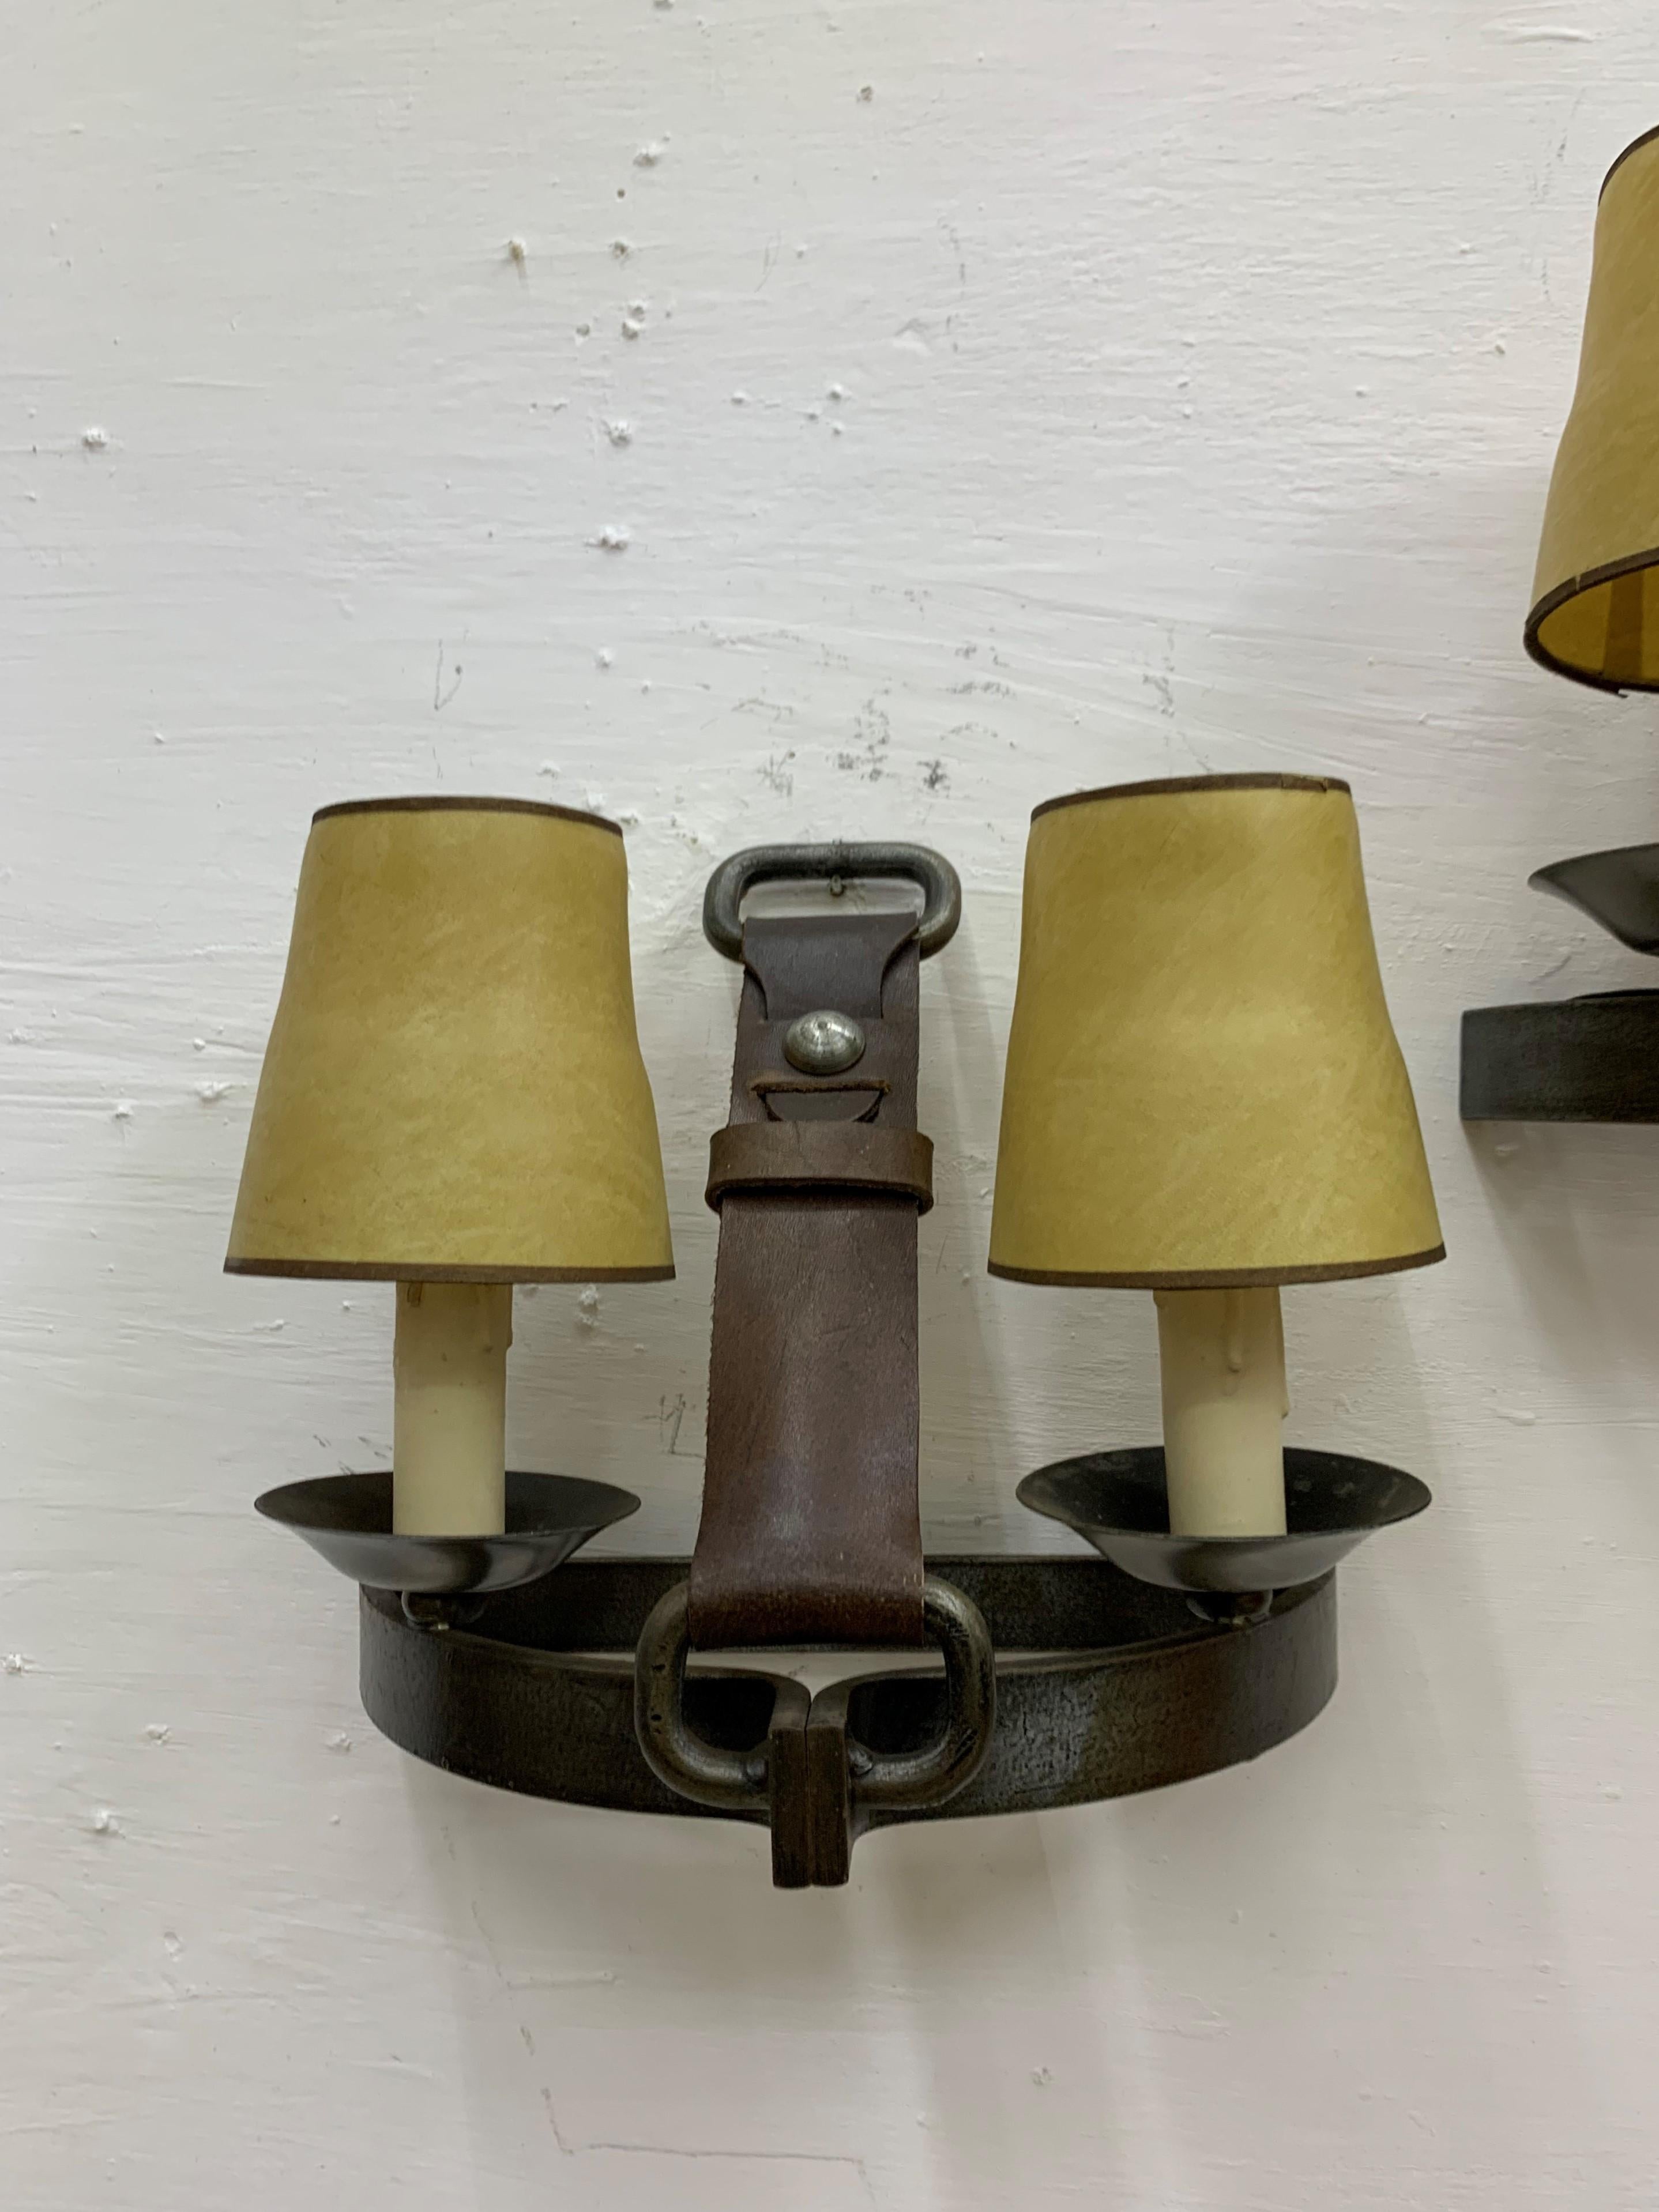 Three Mid-Century Modern sconces made in France, circa 1950. Manufactured in a horse riding stirrup shape attributed to French designer Jean Pierre Ryckaert and very much in the style of French modernist designer Jacques Adnet.
Both leather and